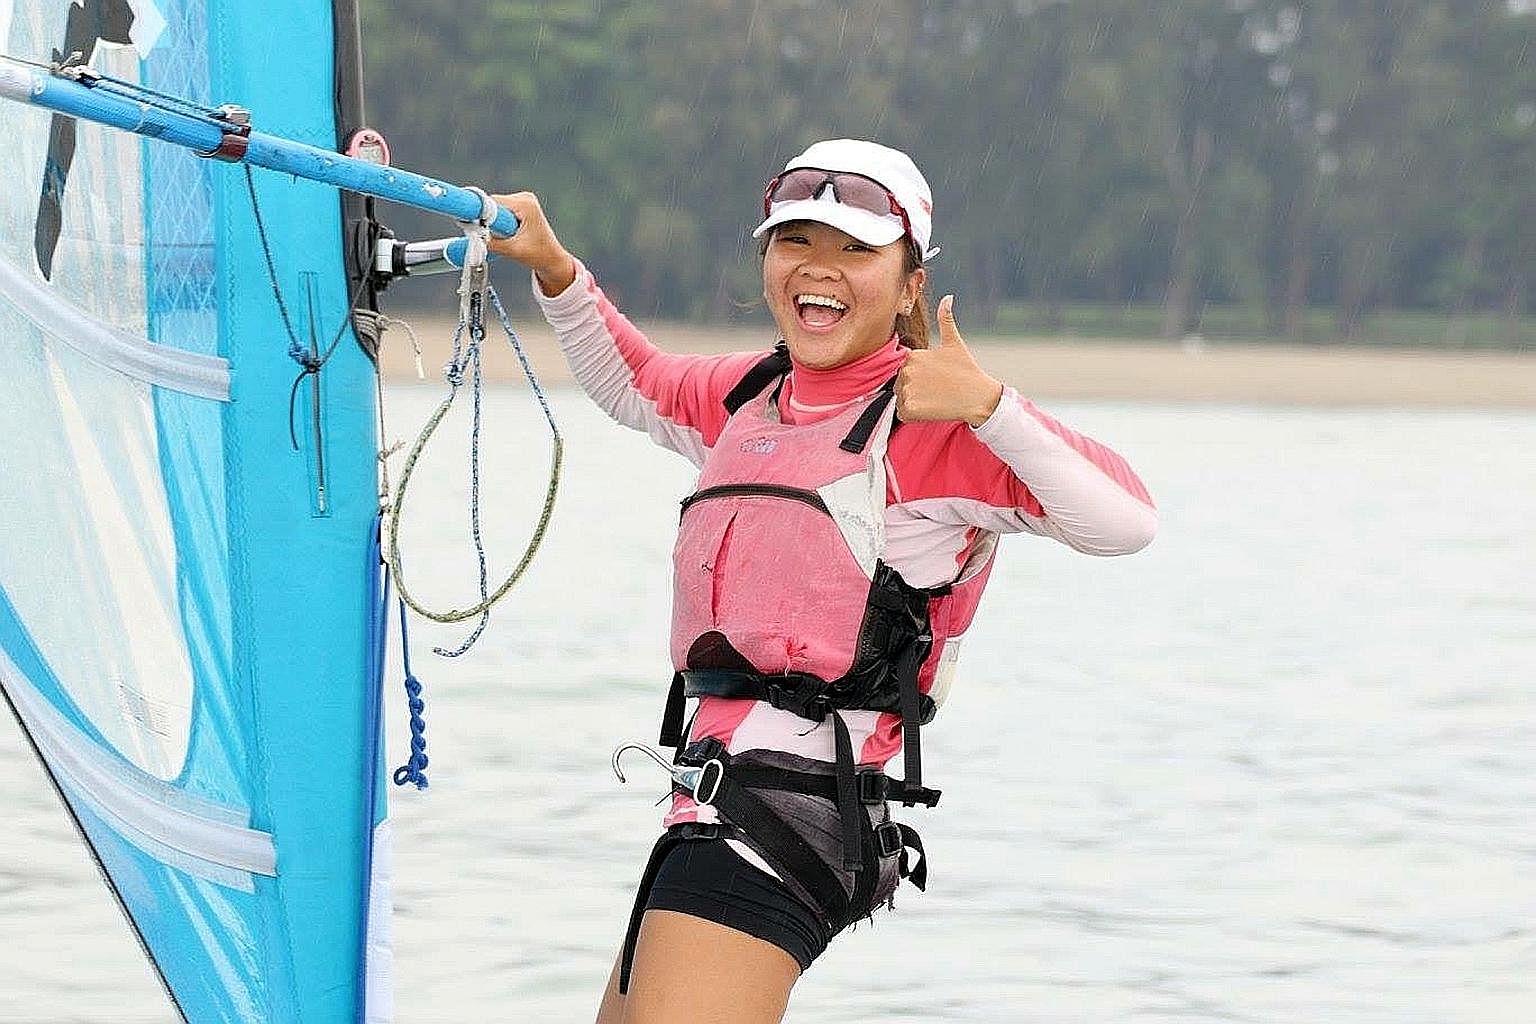 Ms Ynez Lim, who won ITE's Lee Kuan Yew CCA Award this year, is a national windsurfer. She credits the "strong support system at ITE" for helping her balance sports and studies.